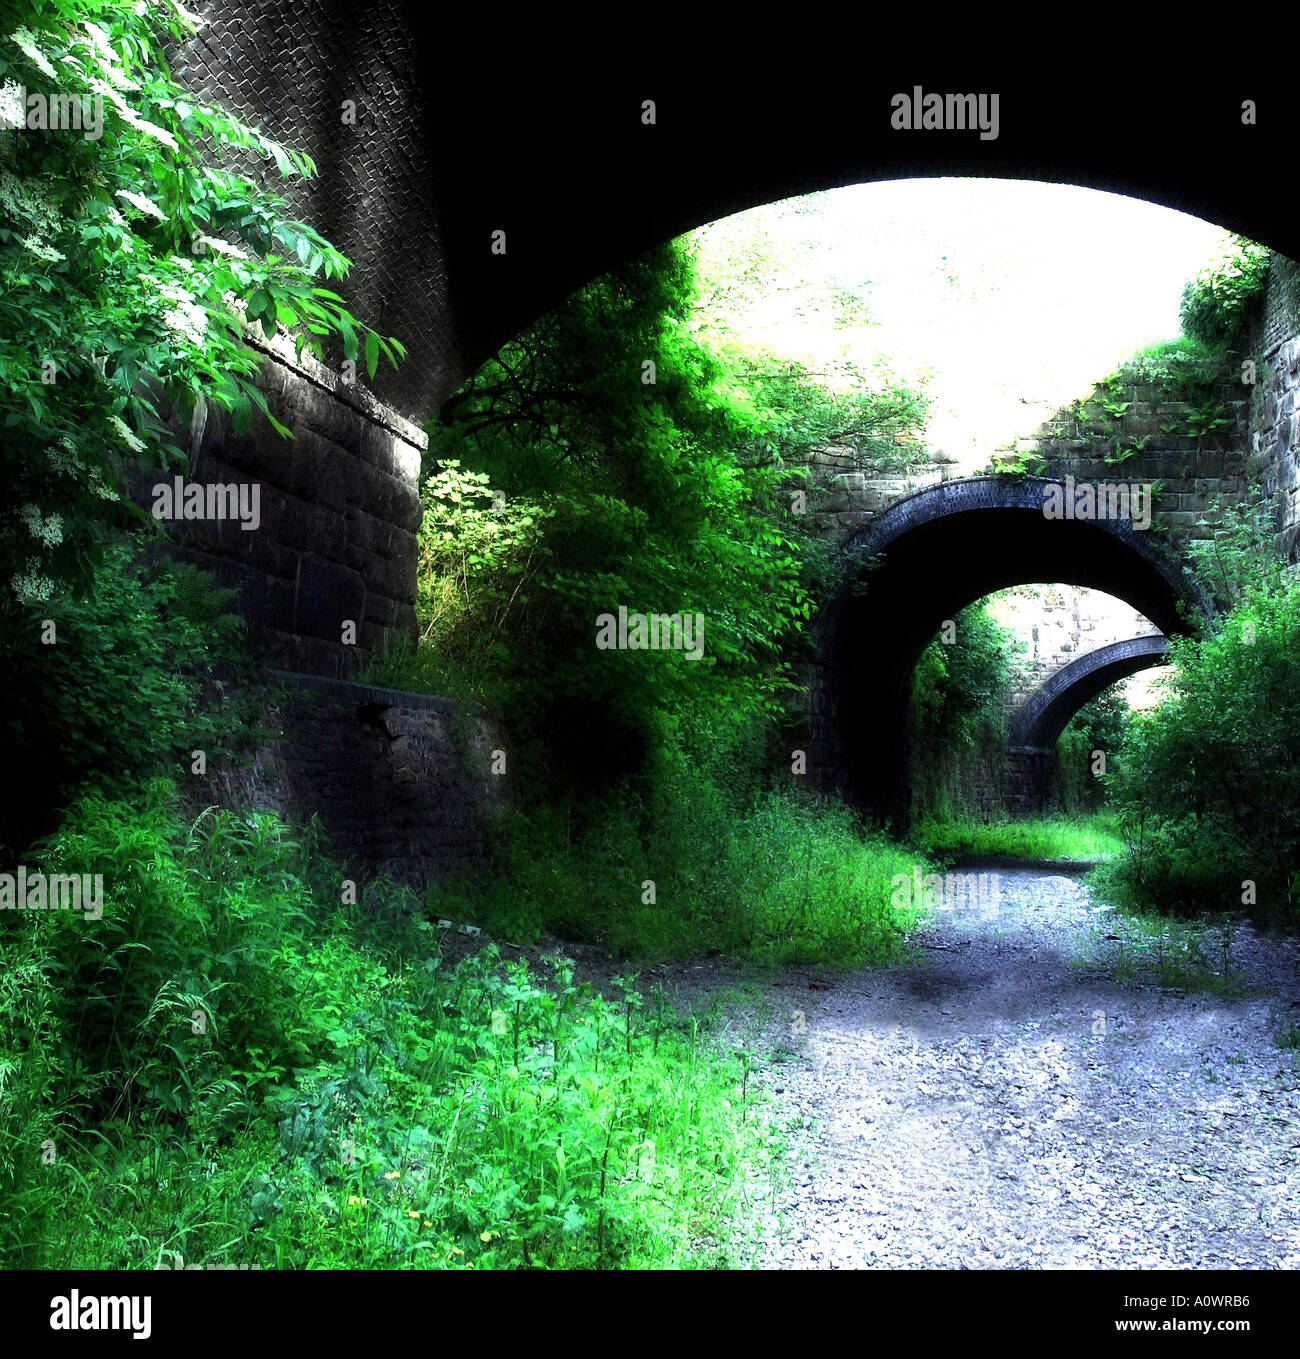 Rebirth. Old railway cutting being reclaimed by nature. Stock Photo